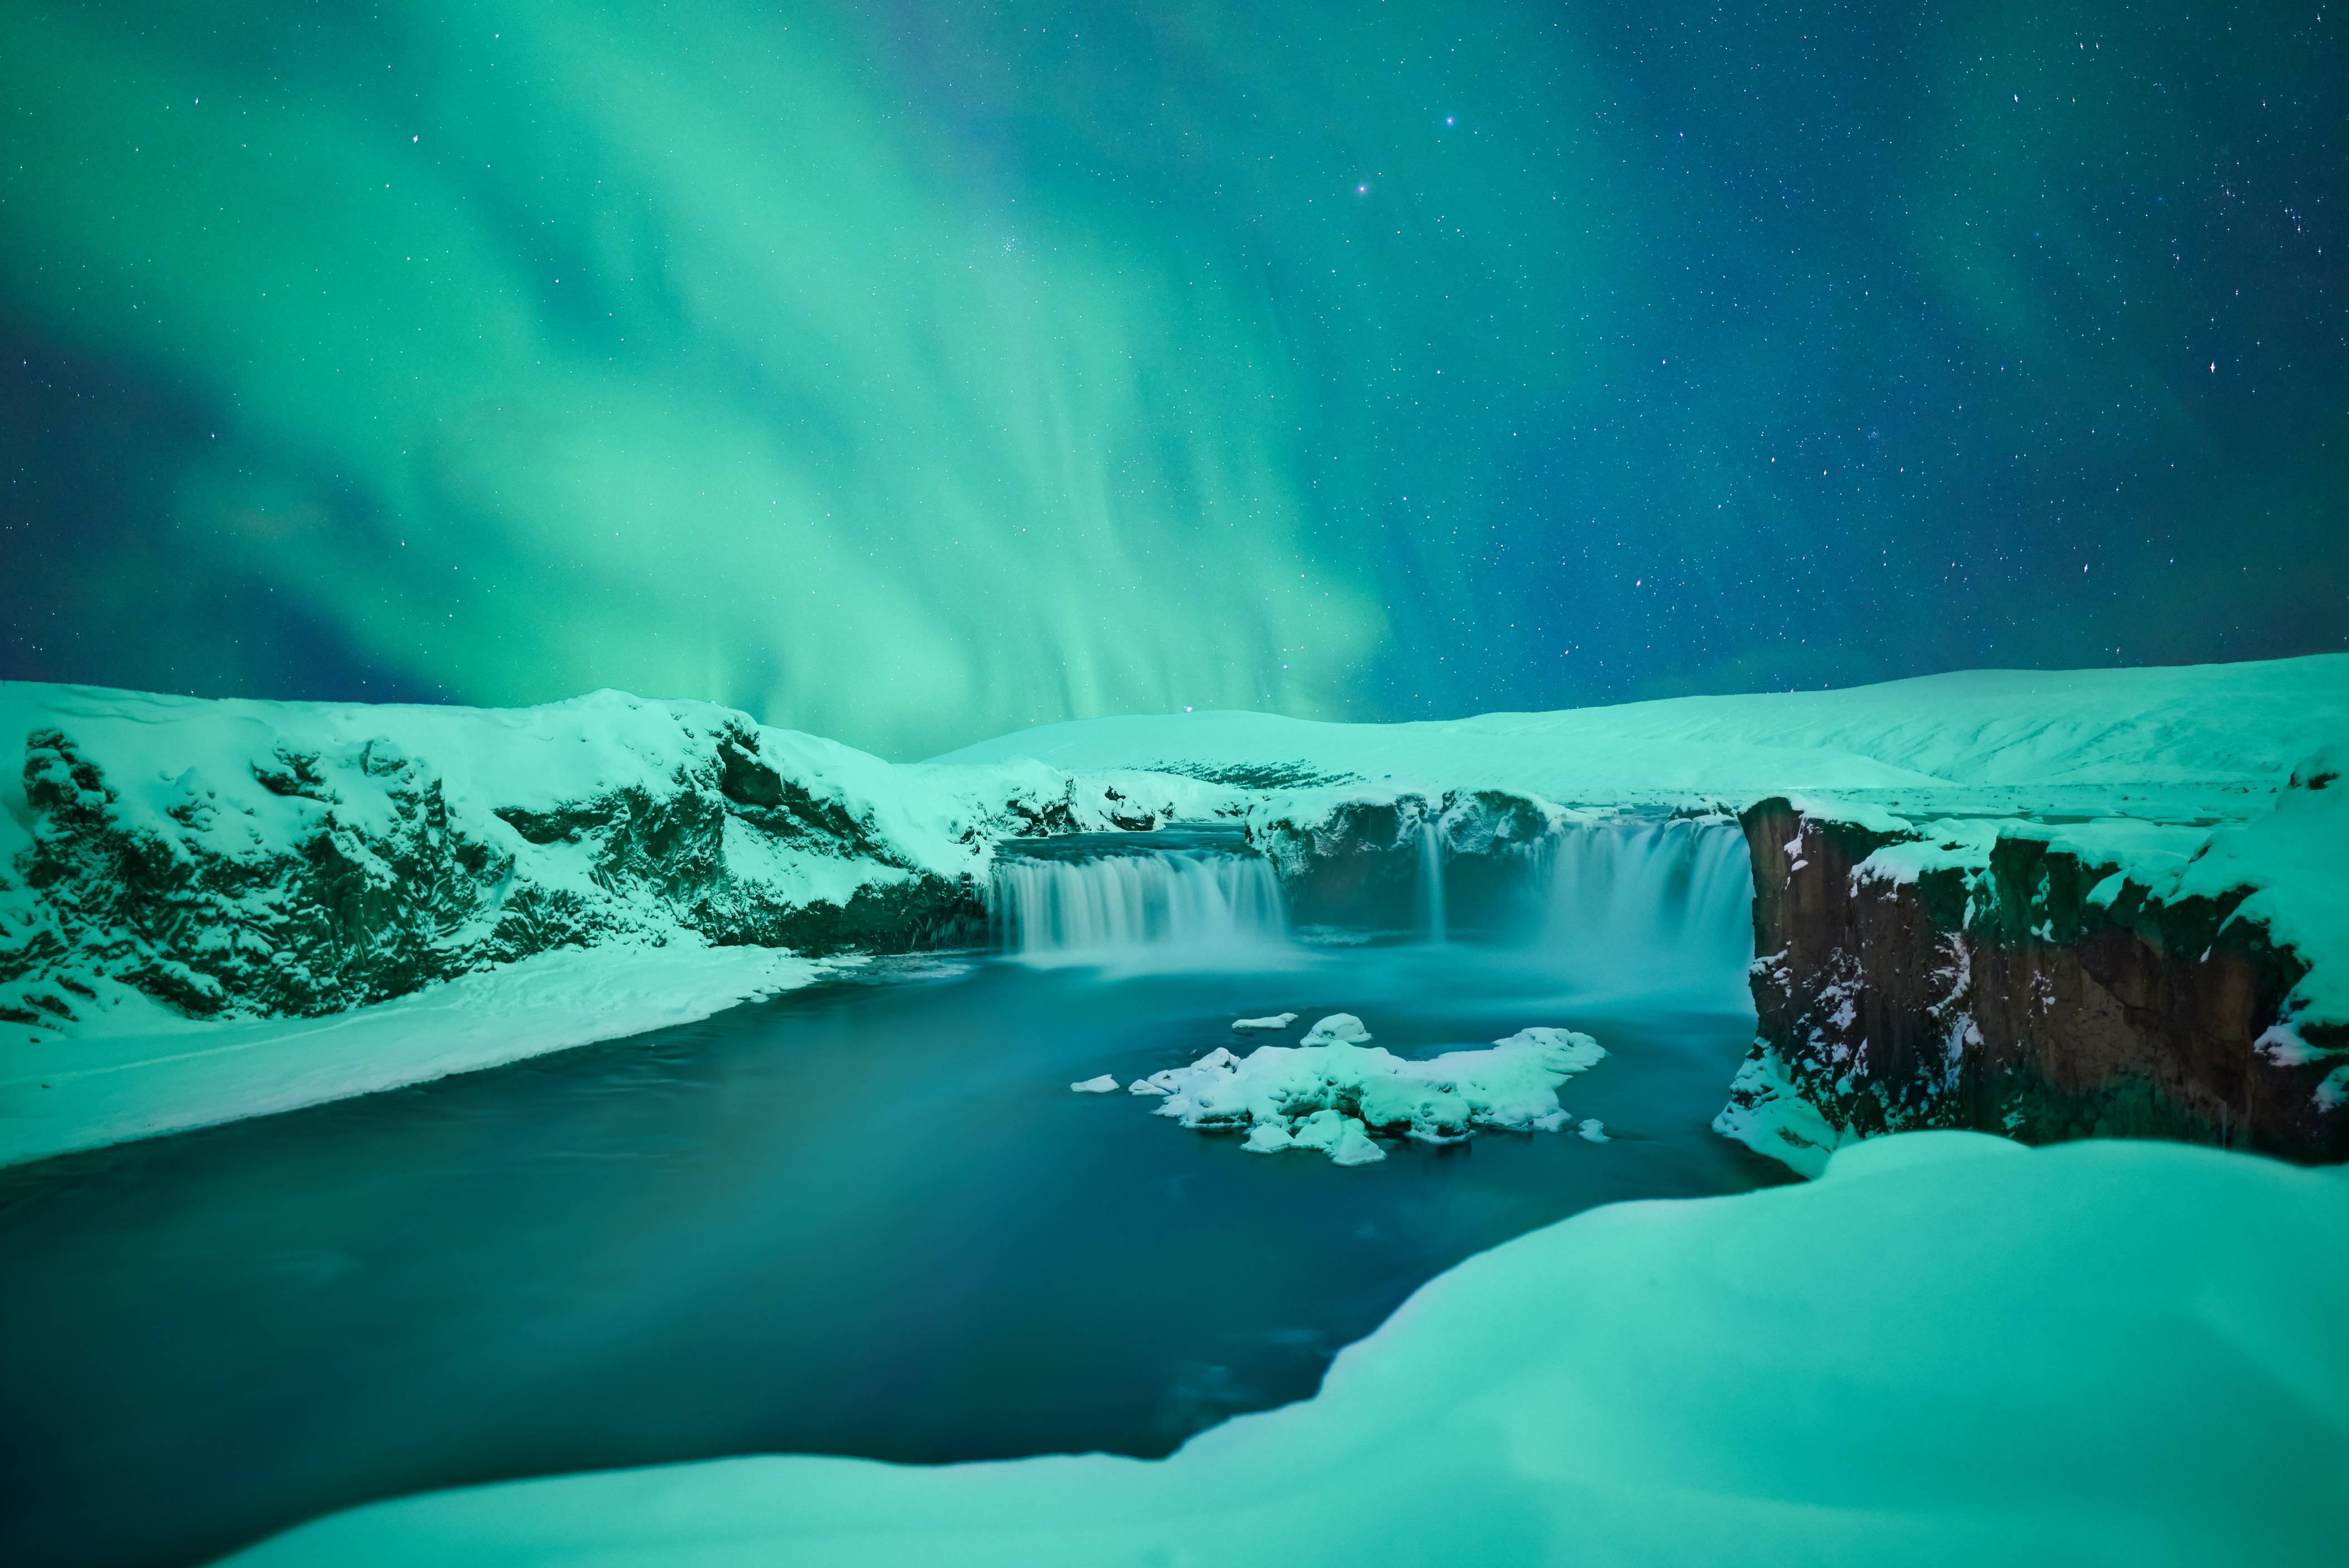 Godafoss-waterfall-in-iceland-in-winter-covered-in-snow-with-northern-lights-green-and-blue-in-the-sky